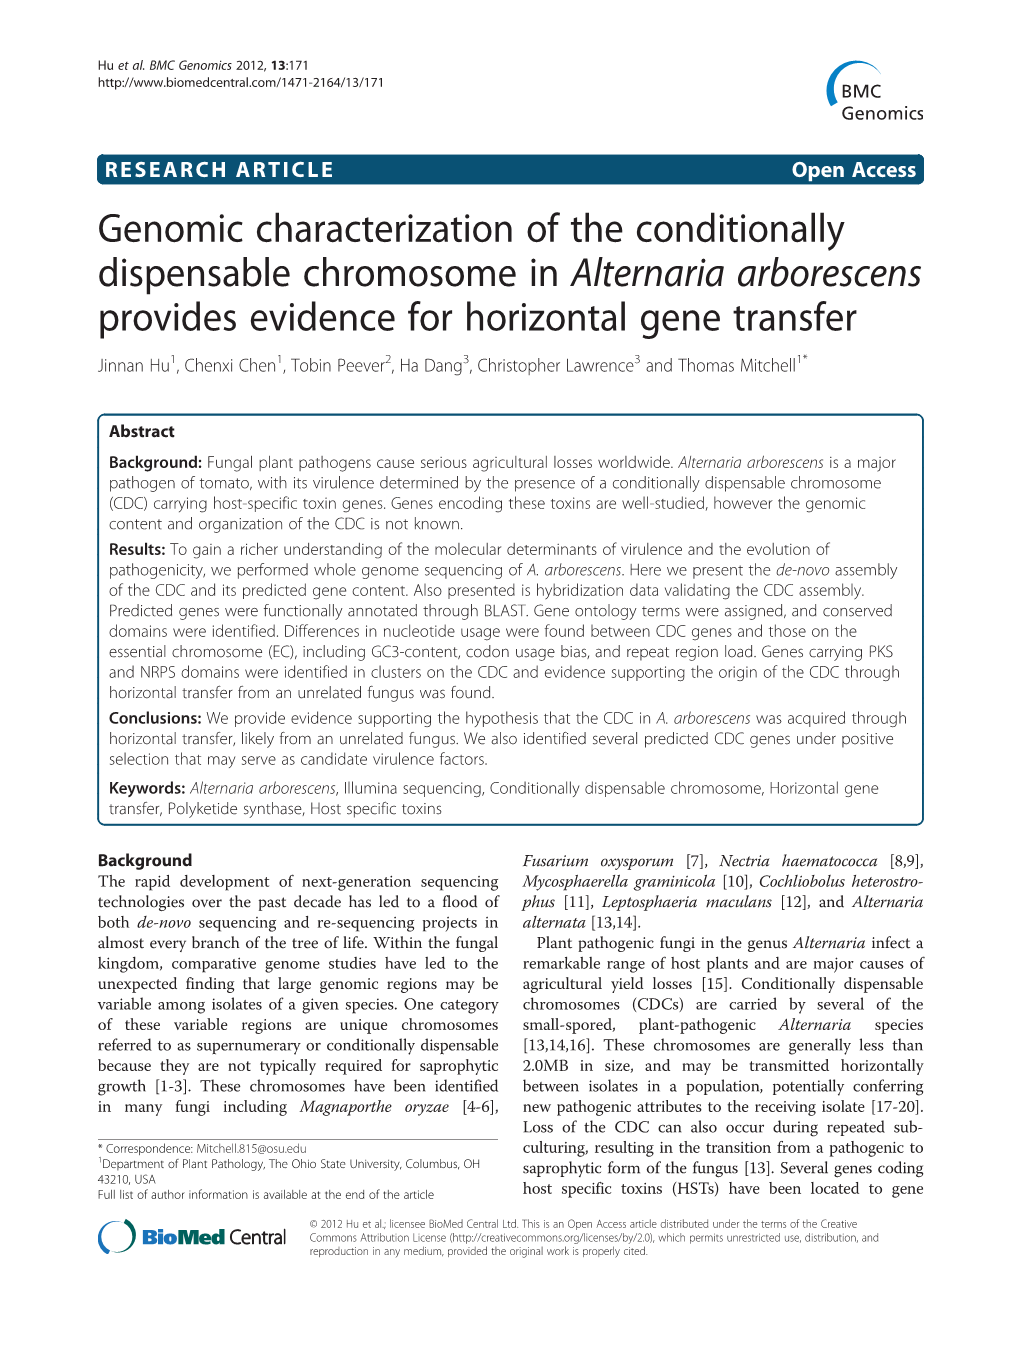 Genomic Characterization of the Conditionally Dispensable